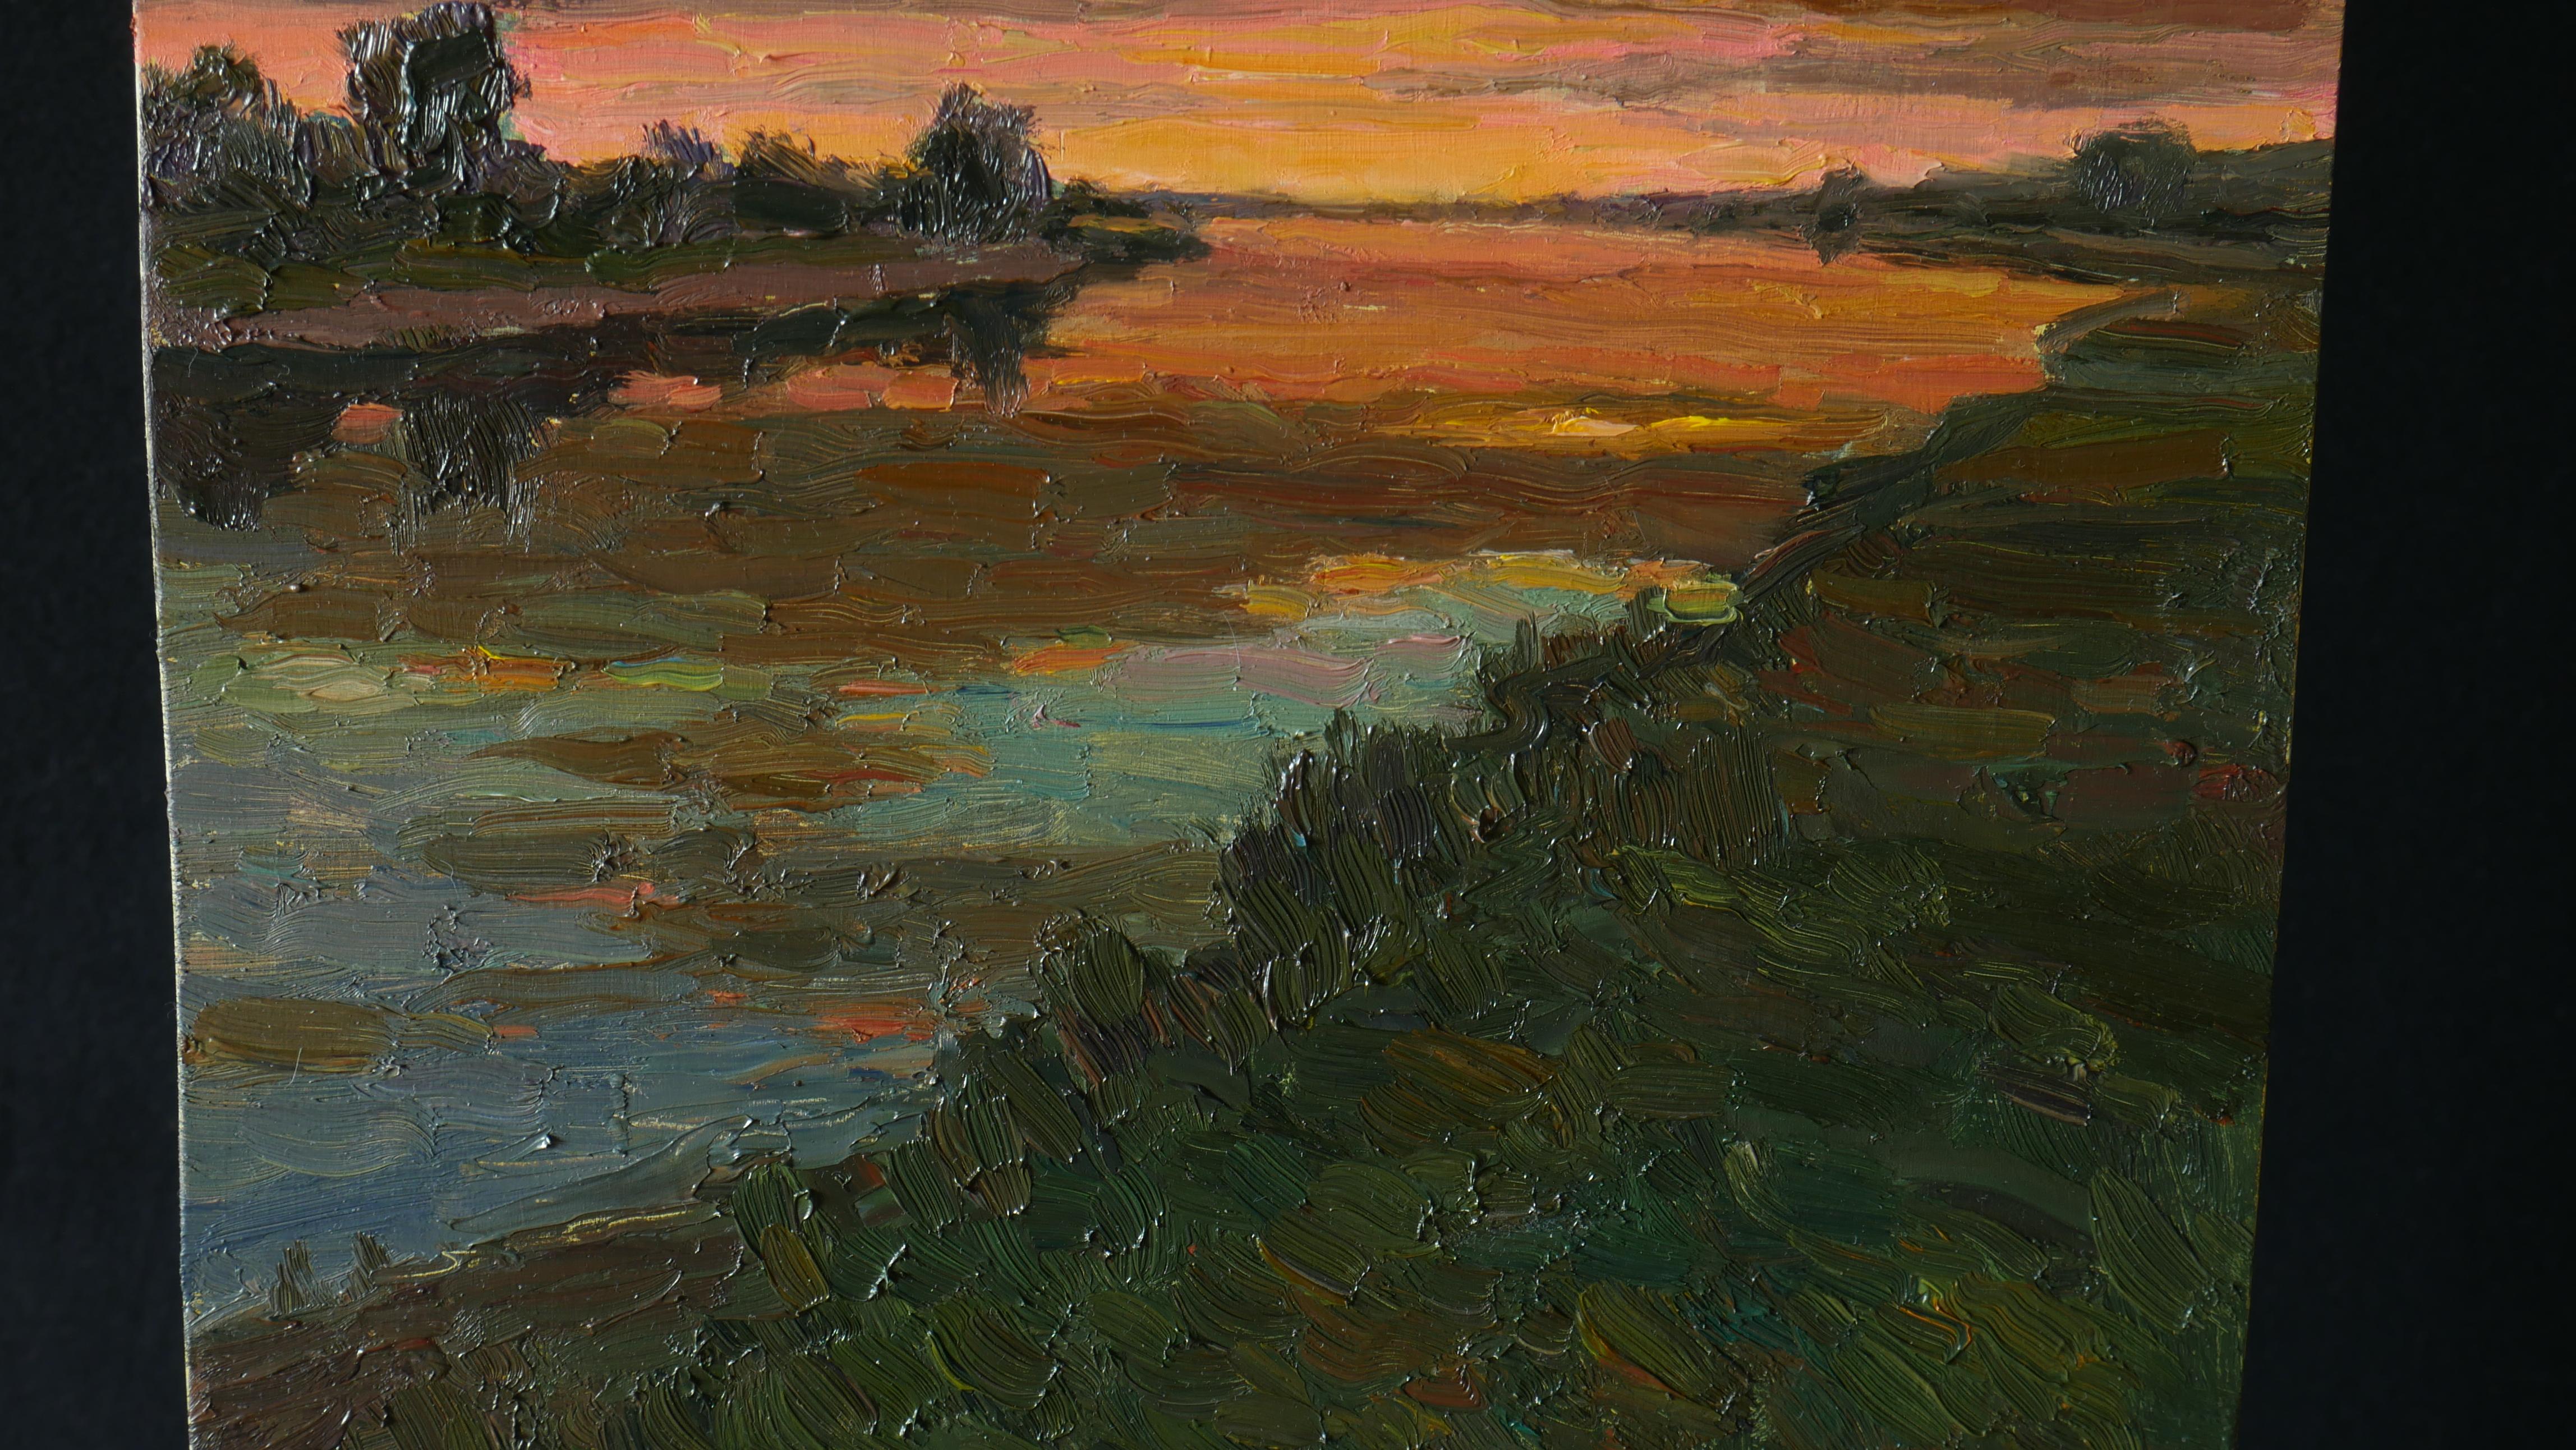 Sunset over the river - sunset landscape painting For Sale 2